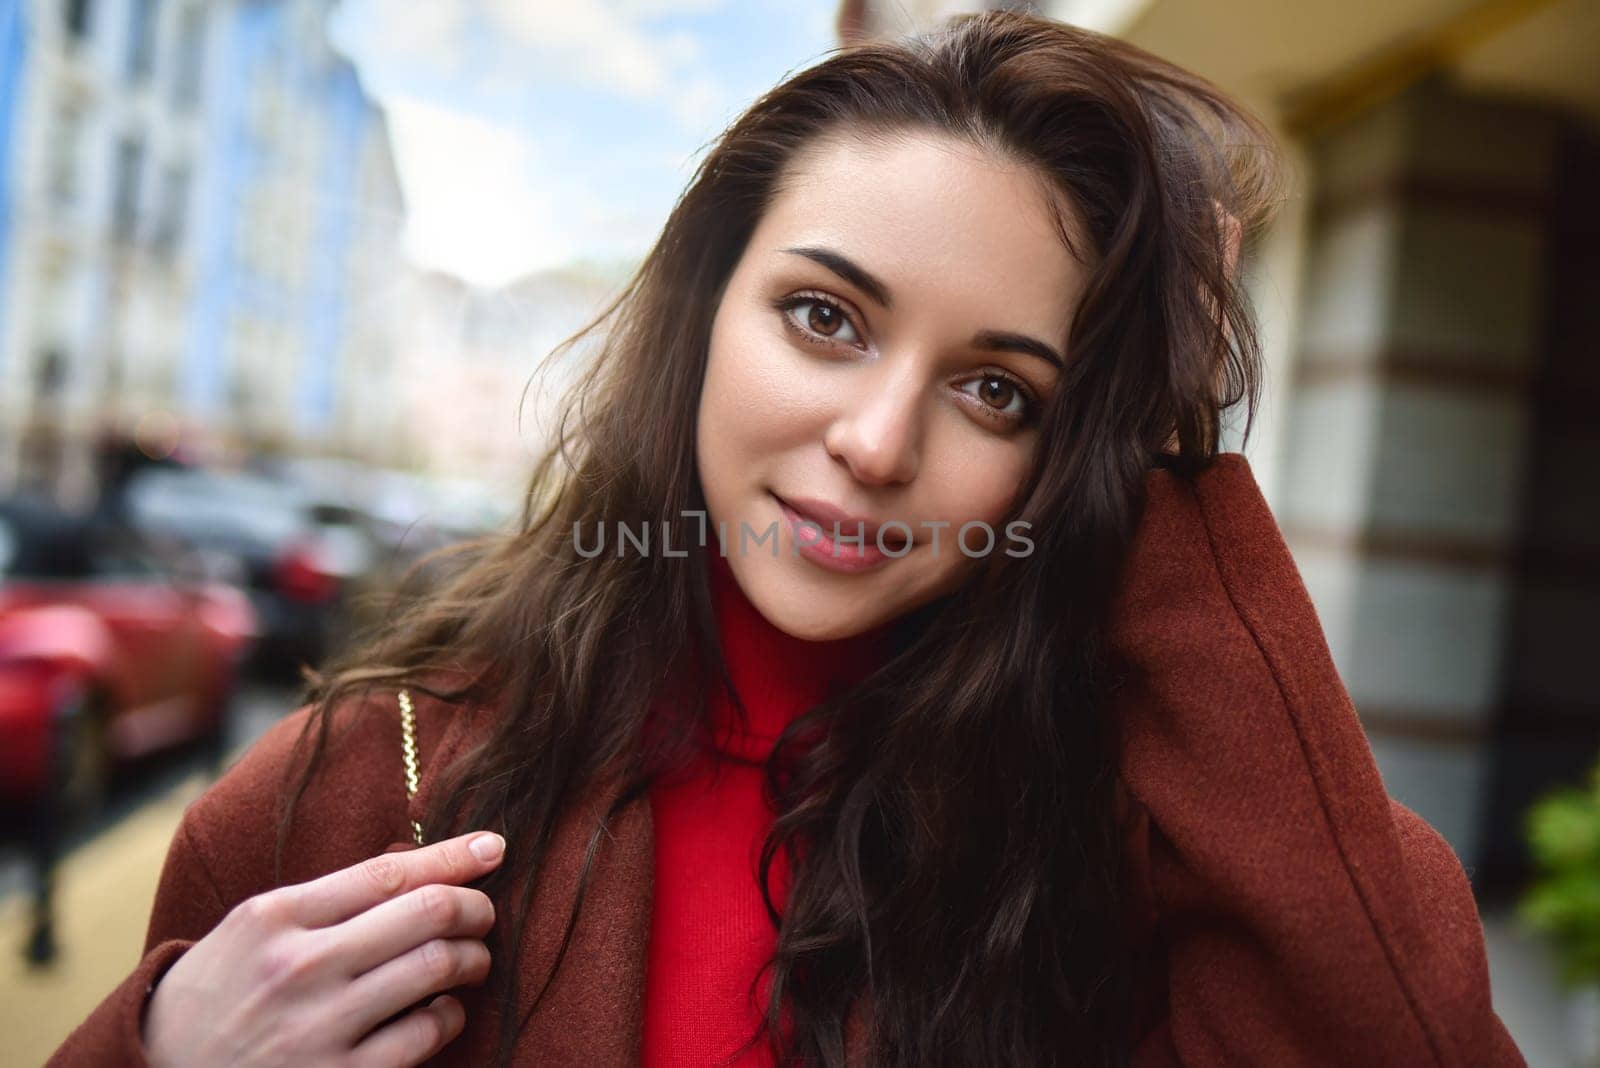 portrait of a fashionably dressed woman posing for the camera in a brown coat and red sweater by Nickstock